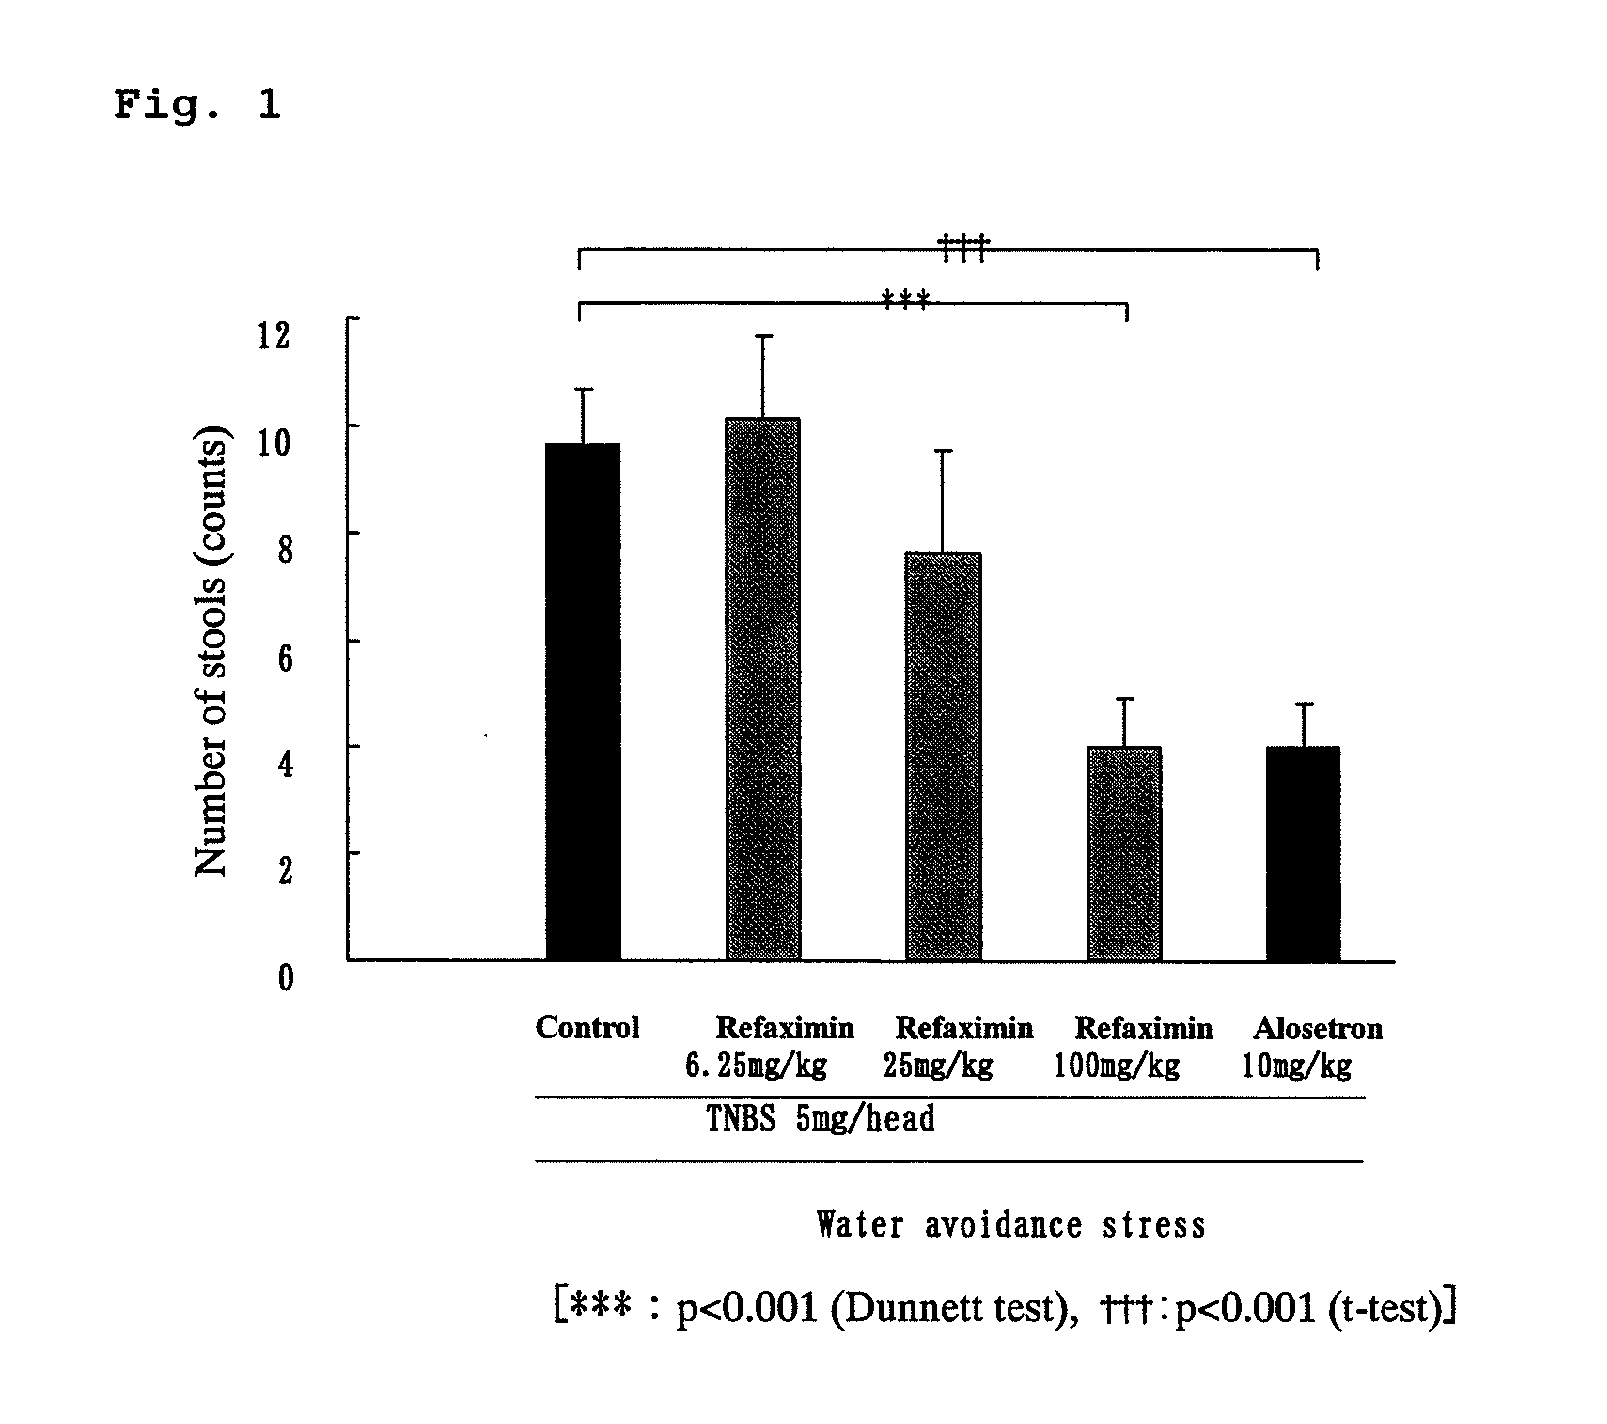 Agent for preventing and/or treating functional gastrointestinal disorder